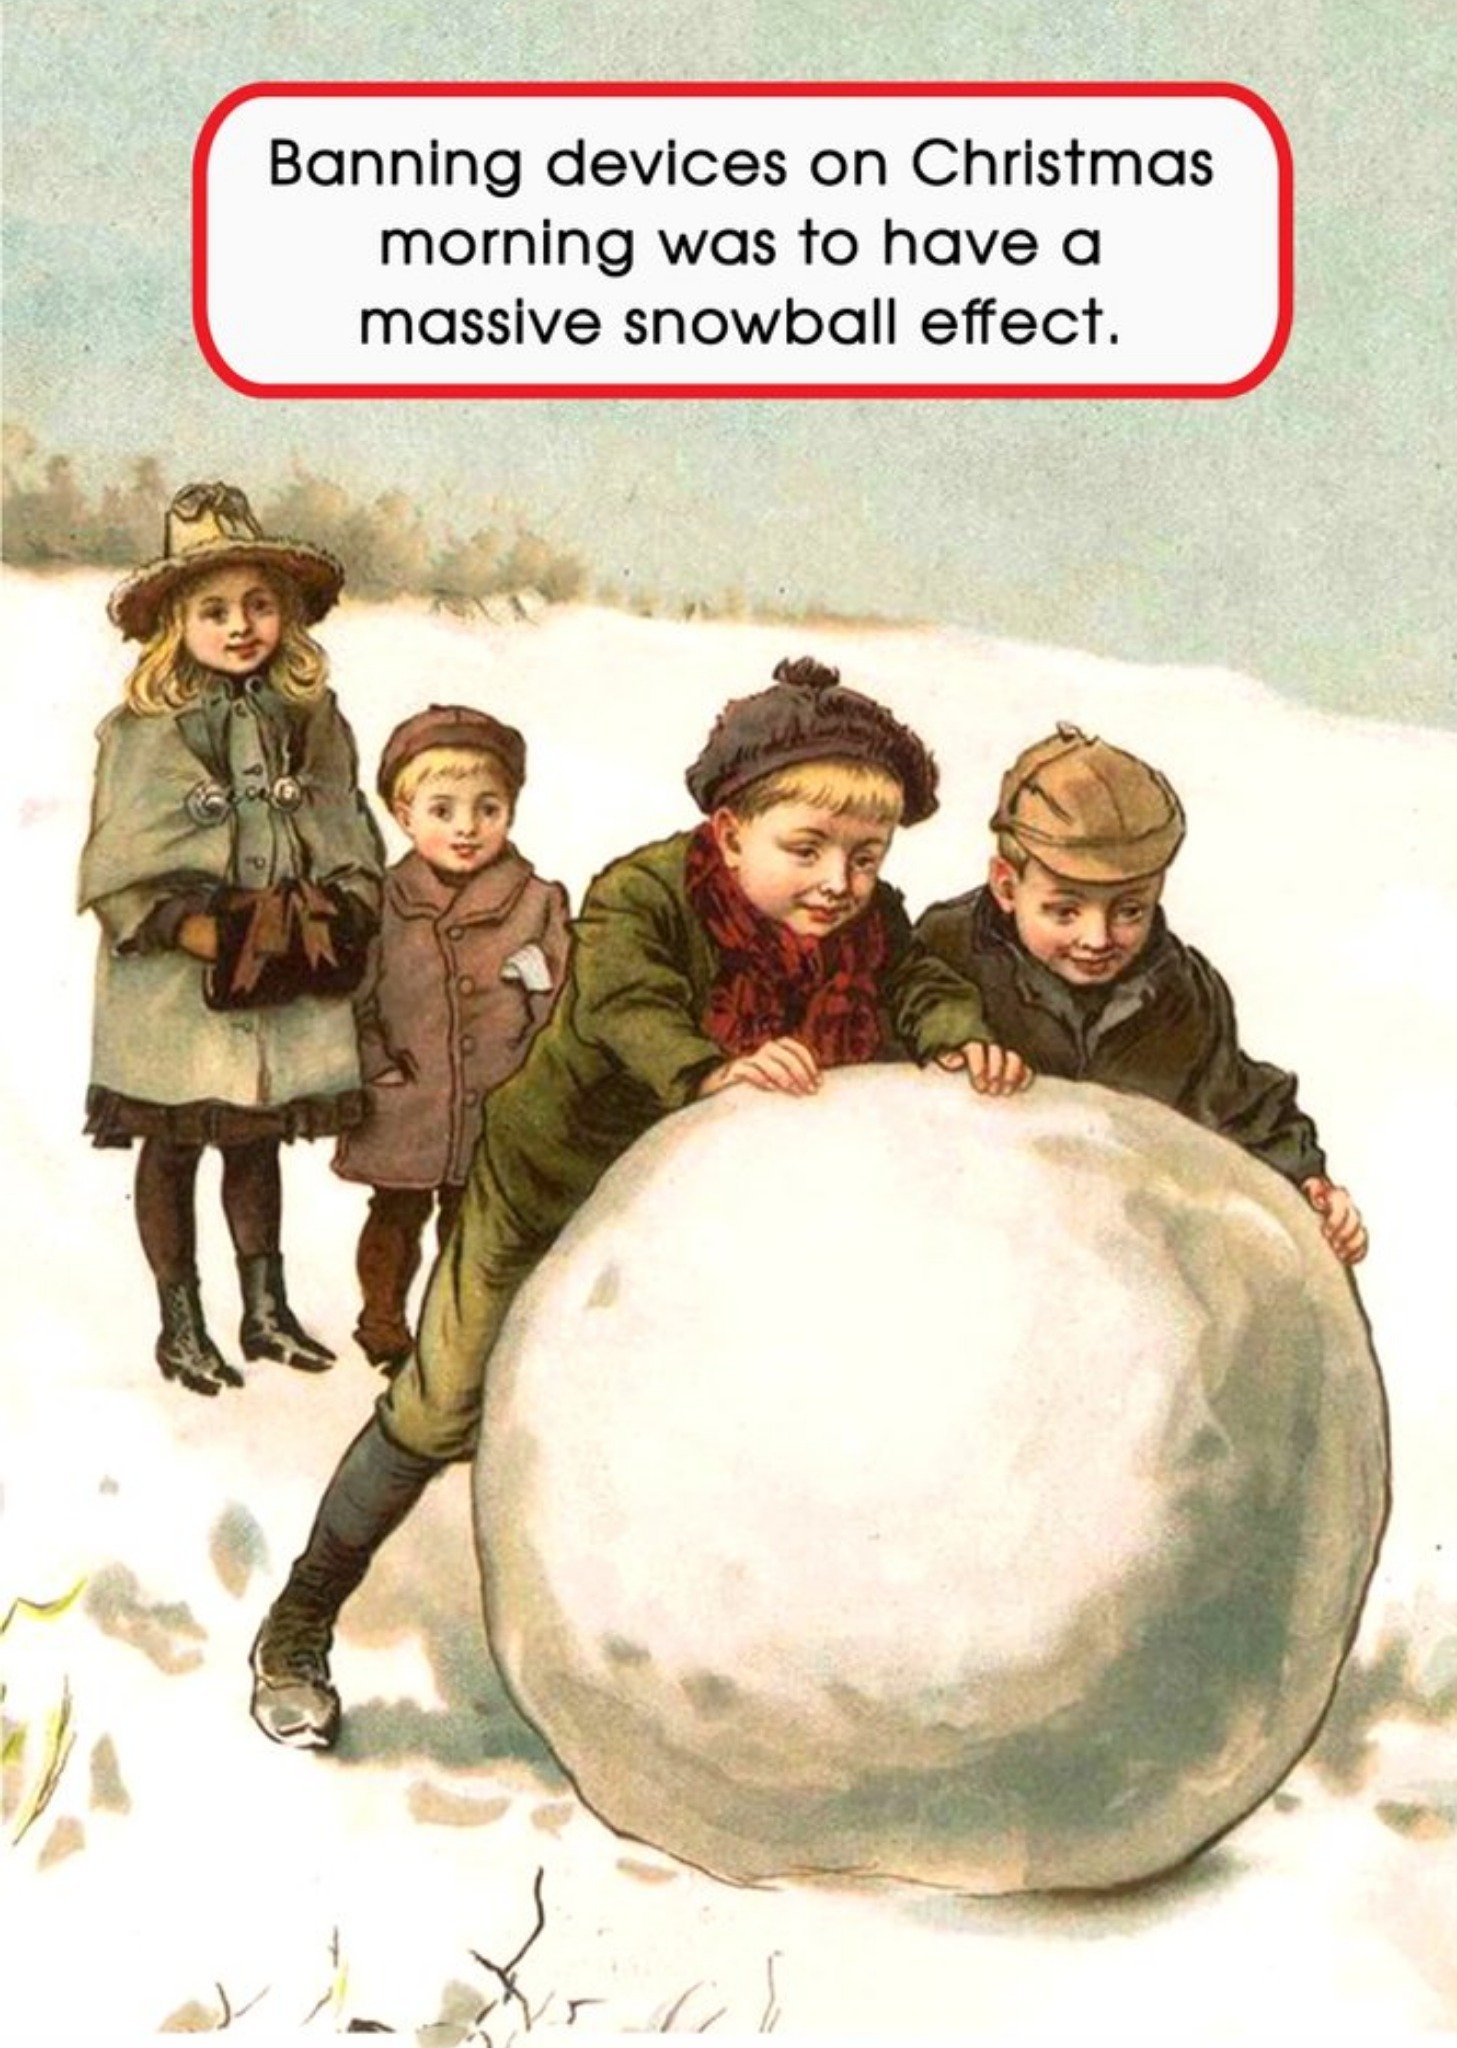 Go La La Funny Banning Devices On Christmas Morning Was To Have A Massive Snowball Effect Card Ecard